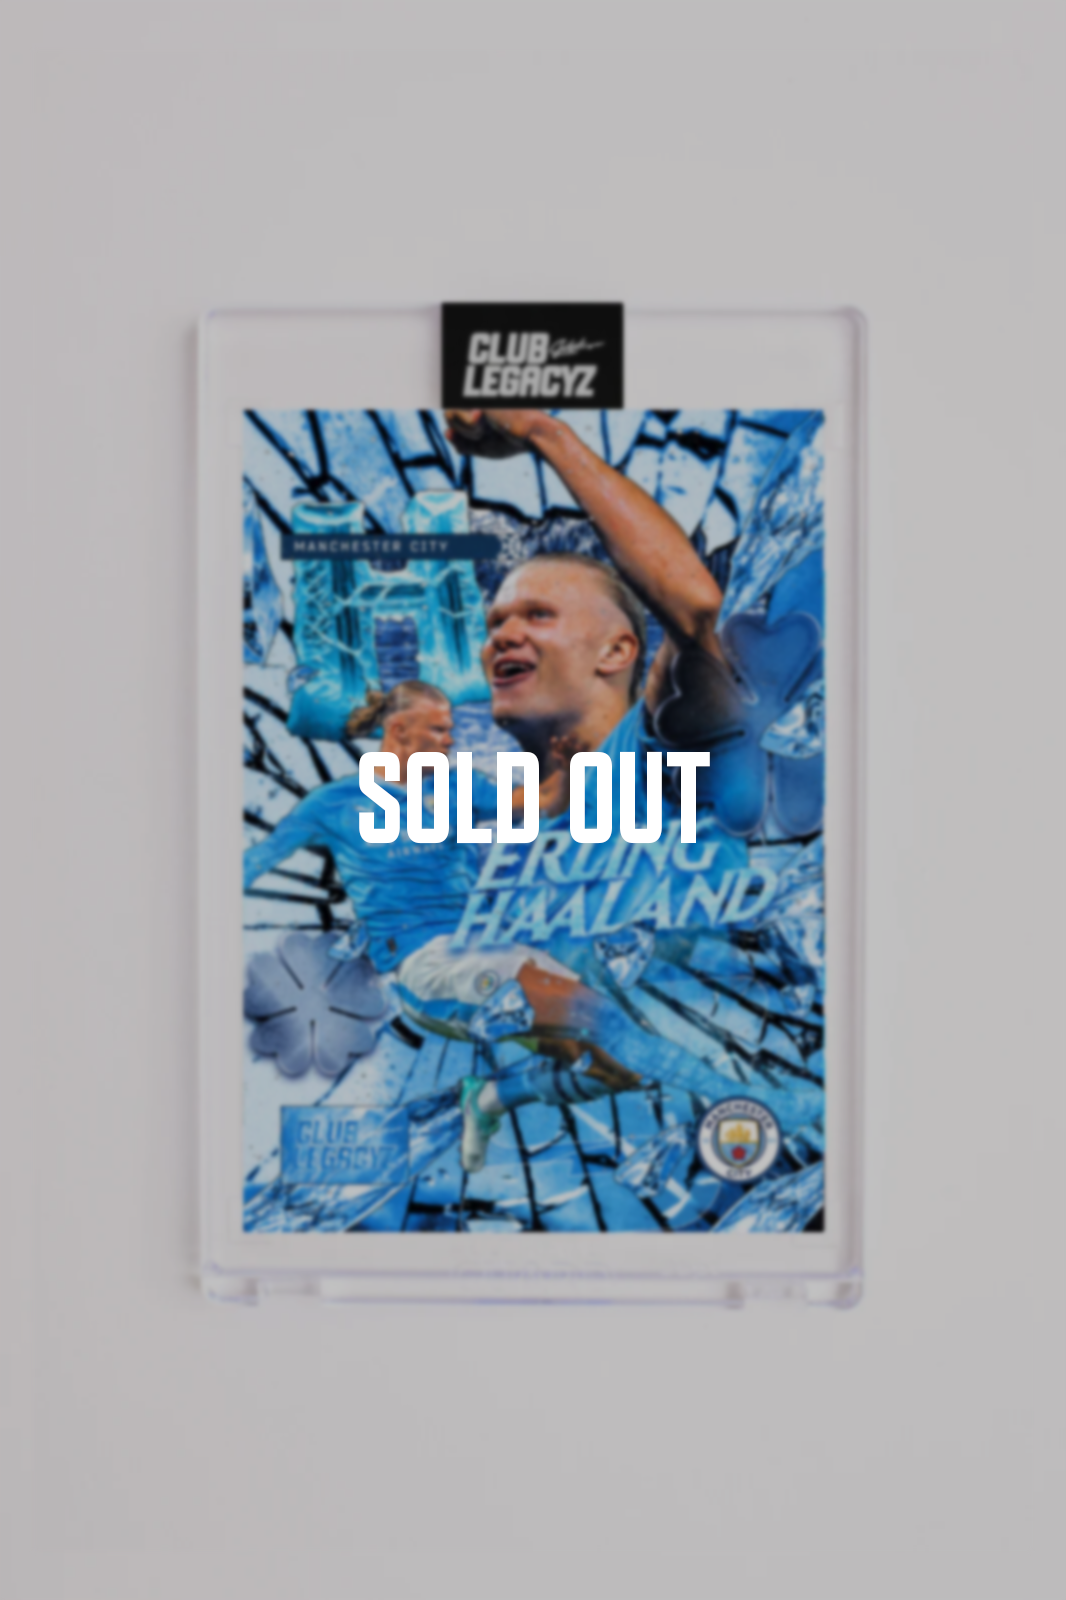 Manchester City - Erling Haaland Frozen Icon limited to 100